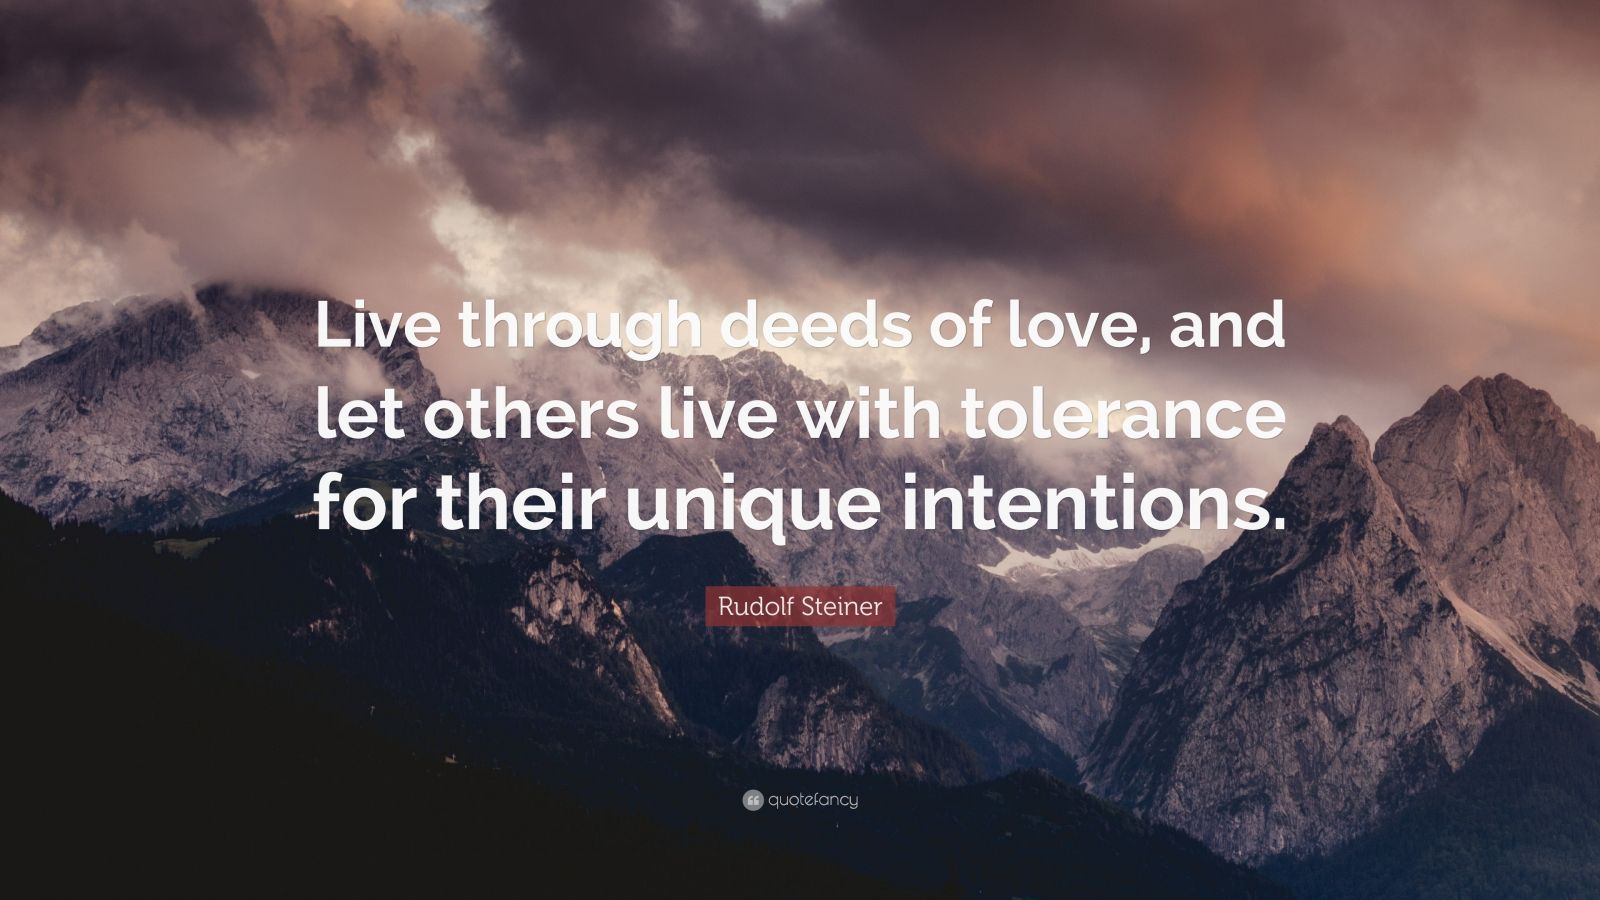 Rudolf Steiner Quote: “Live through deeds of love, and let others live ...